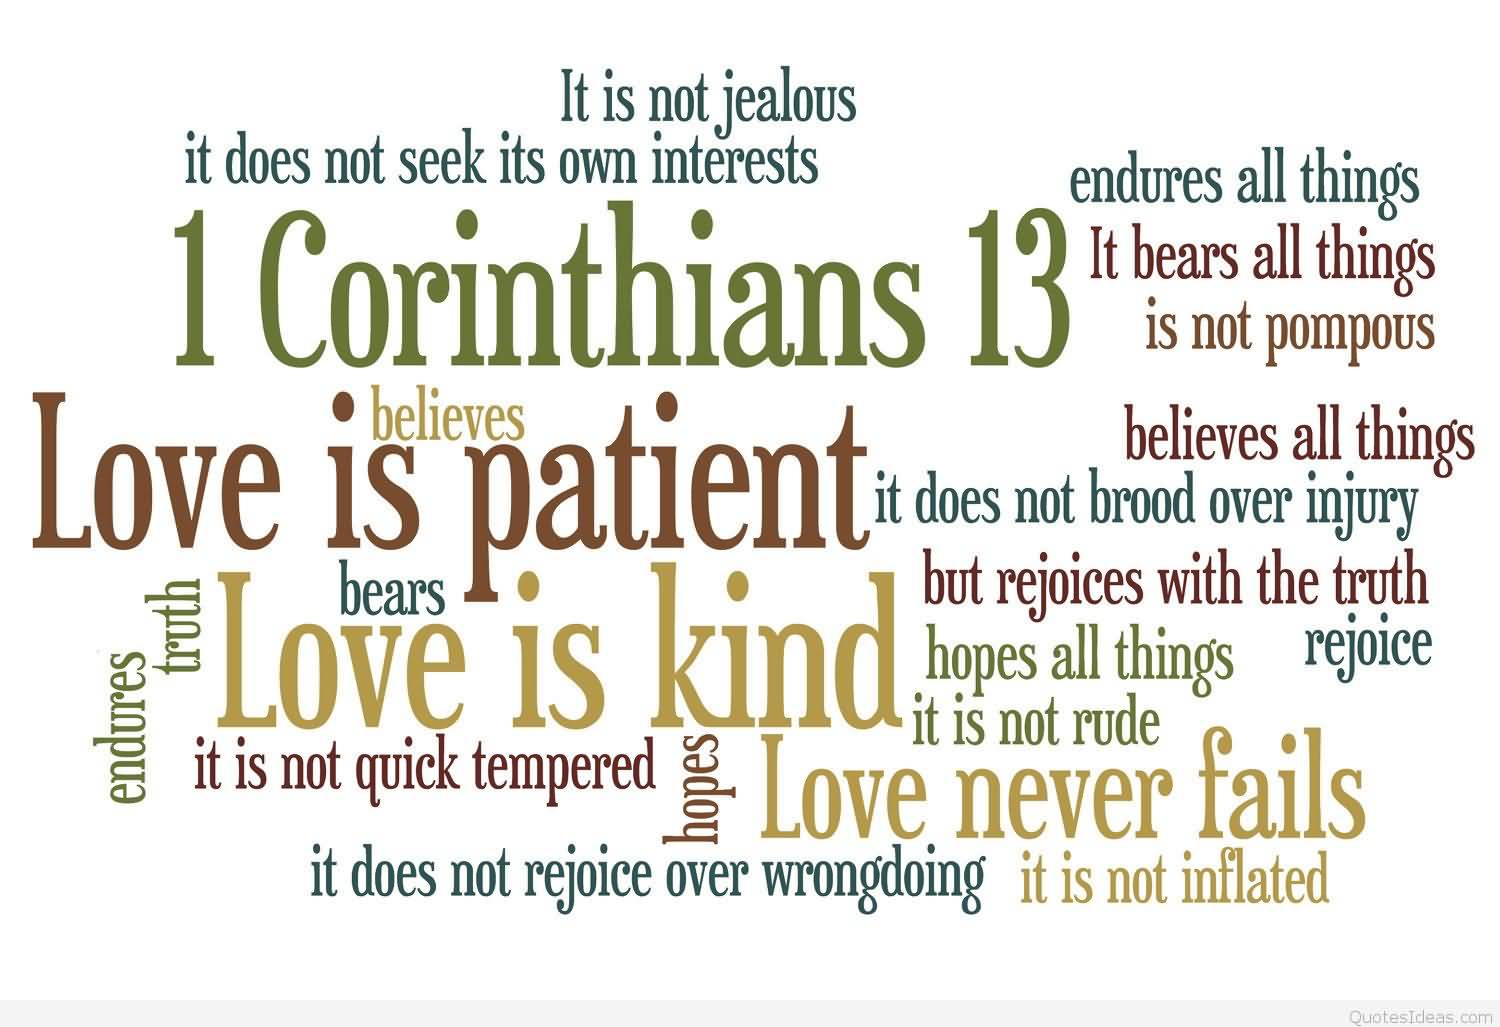 Christian Quotes On Love 18